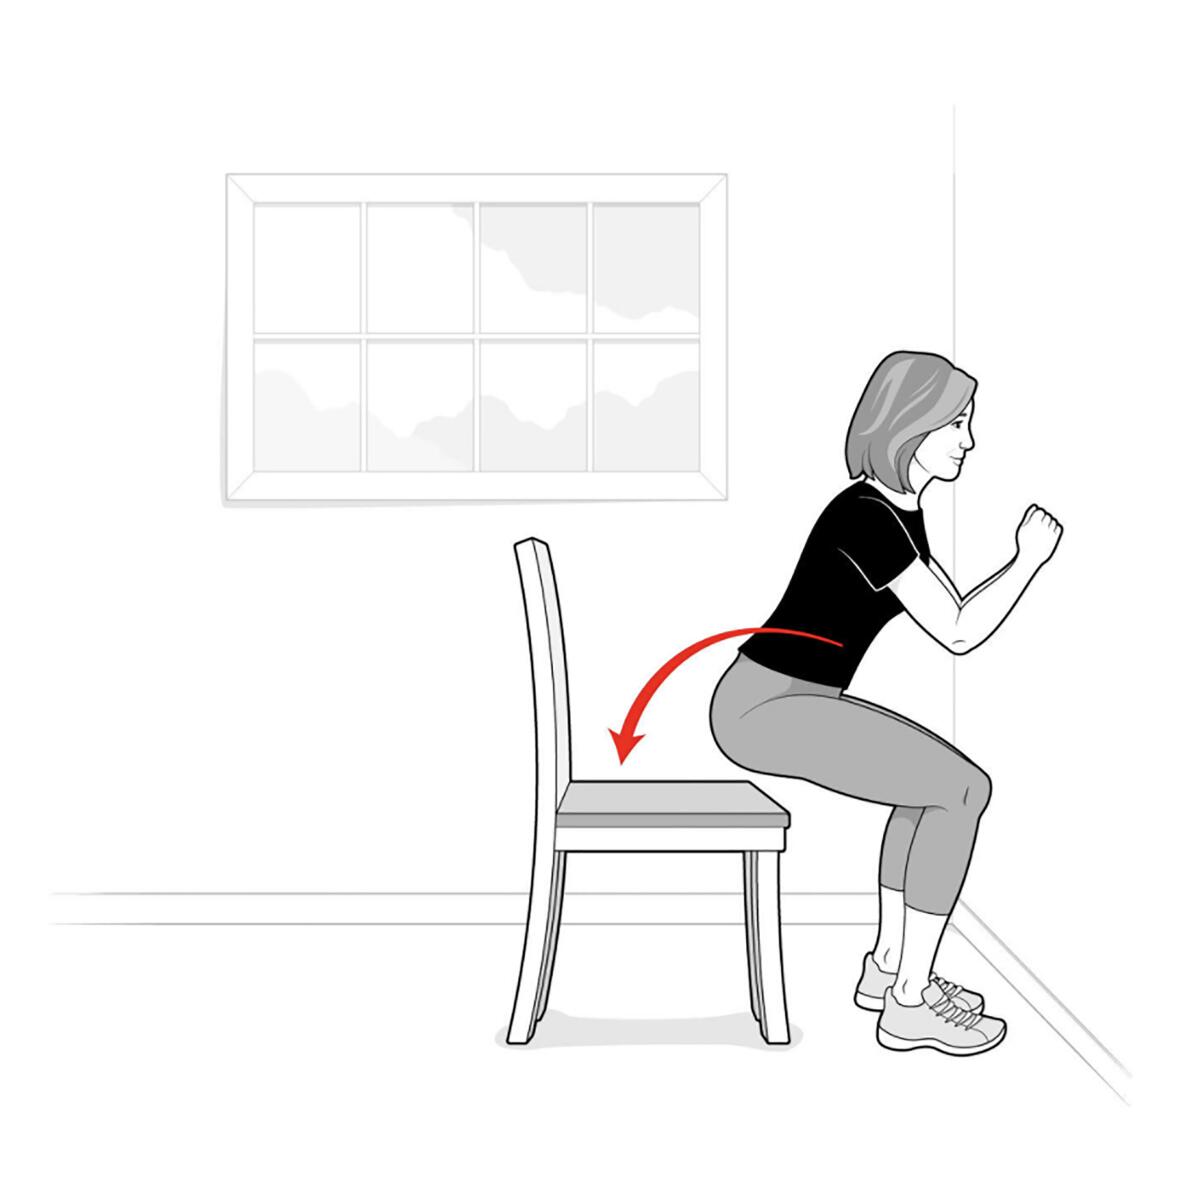 A sketch shows a woman slowly bending her knees and lowering herself to almost touch the chair's seat.